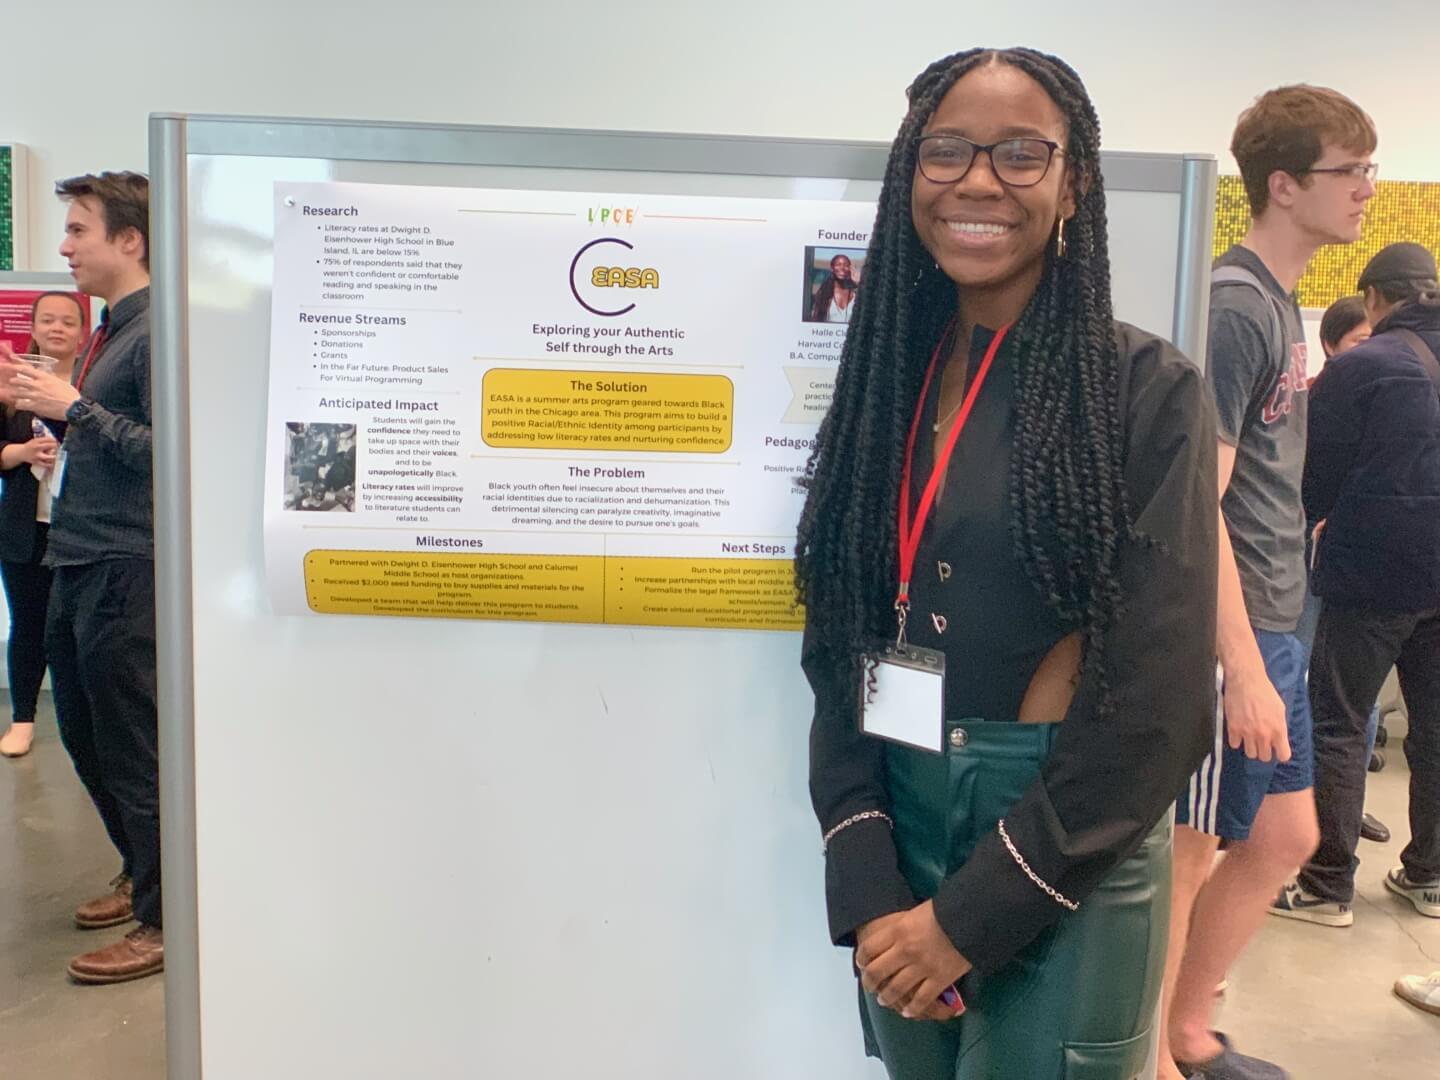 Halle Clottey with a poster for the start-up “EASA (Exploring your Authentic Self through the Arts)”